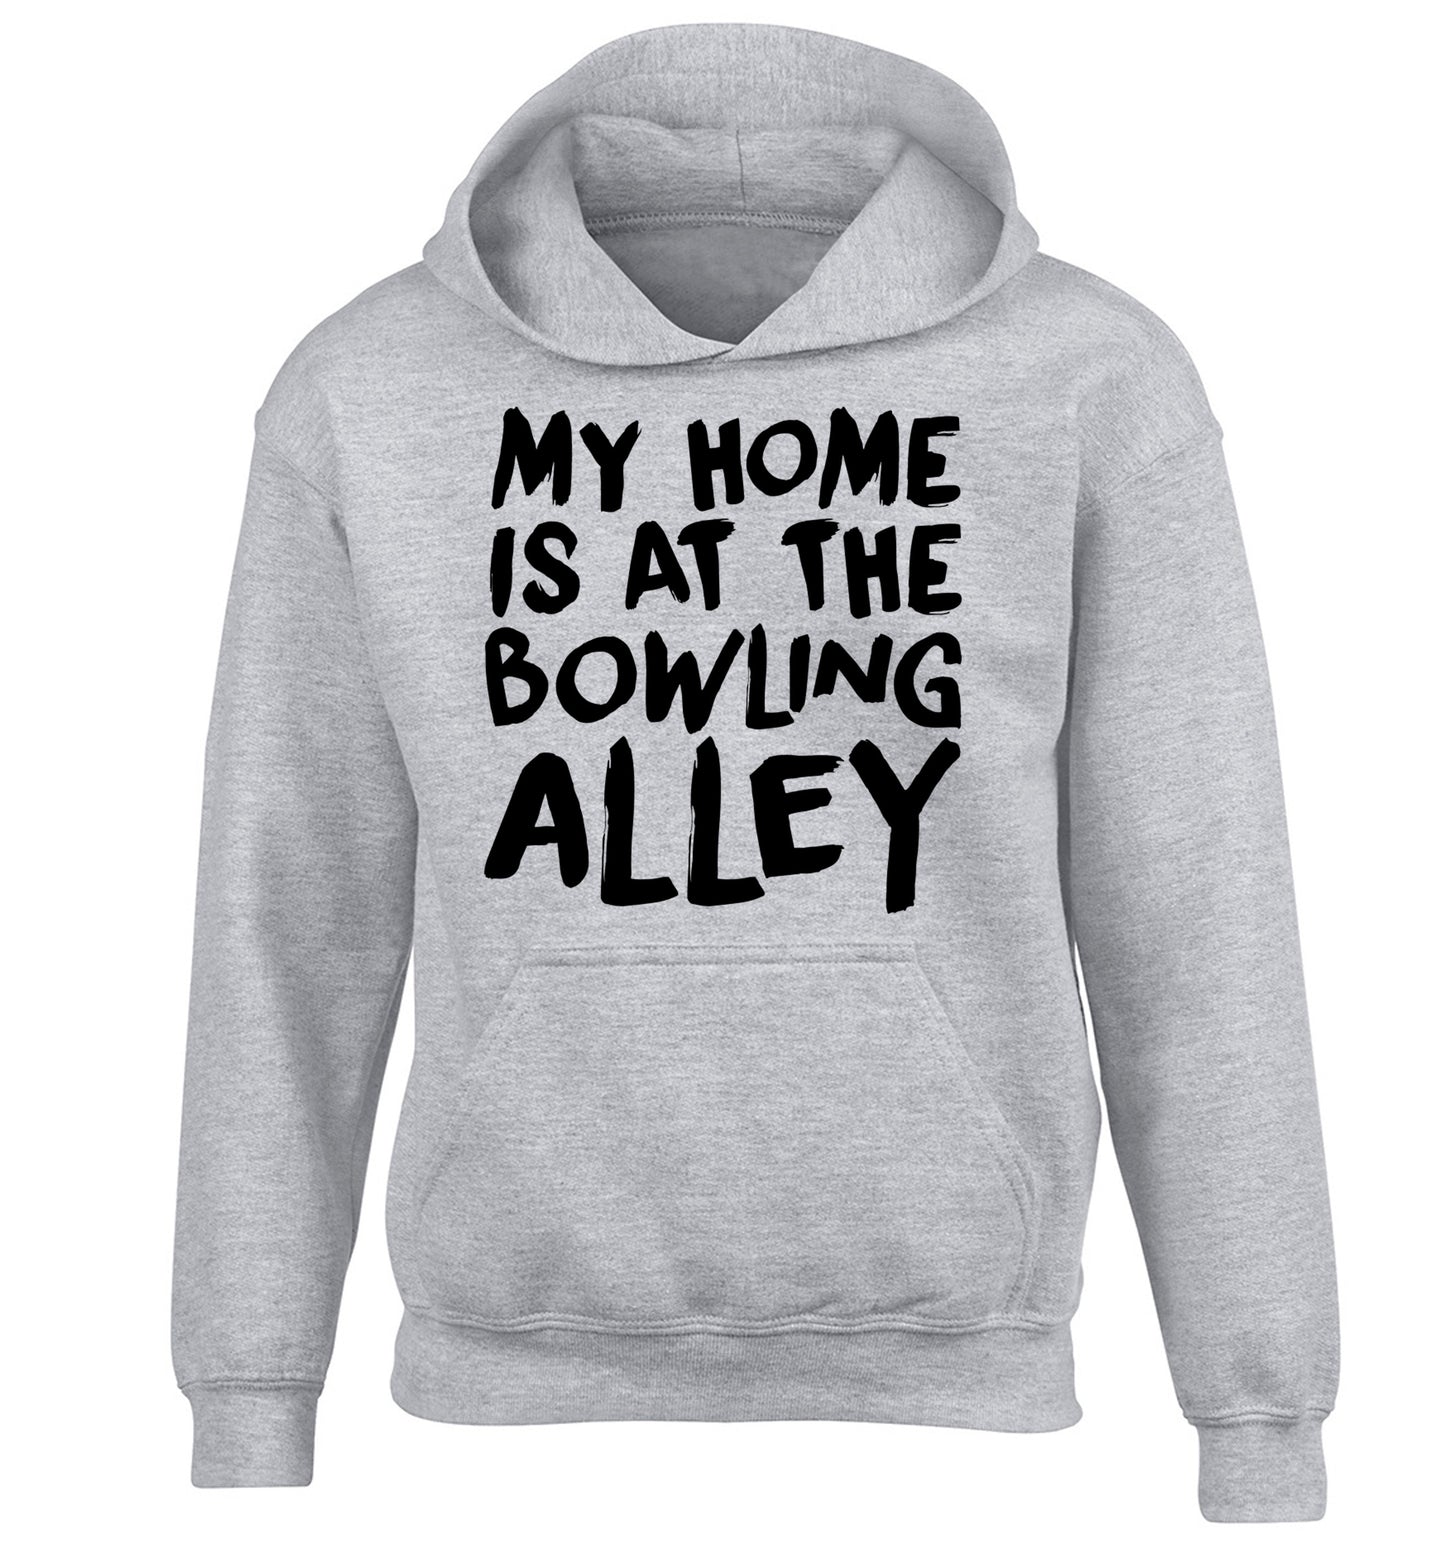 My home is at the bowling alley children's grey hoodie 12-14 Years